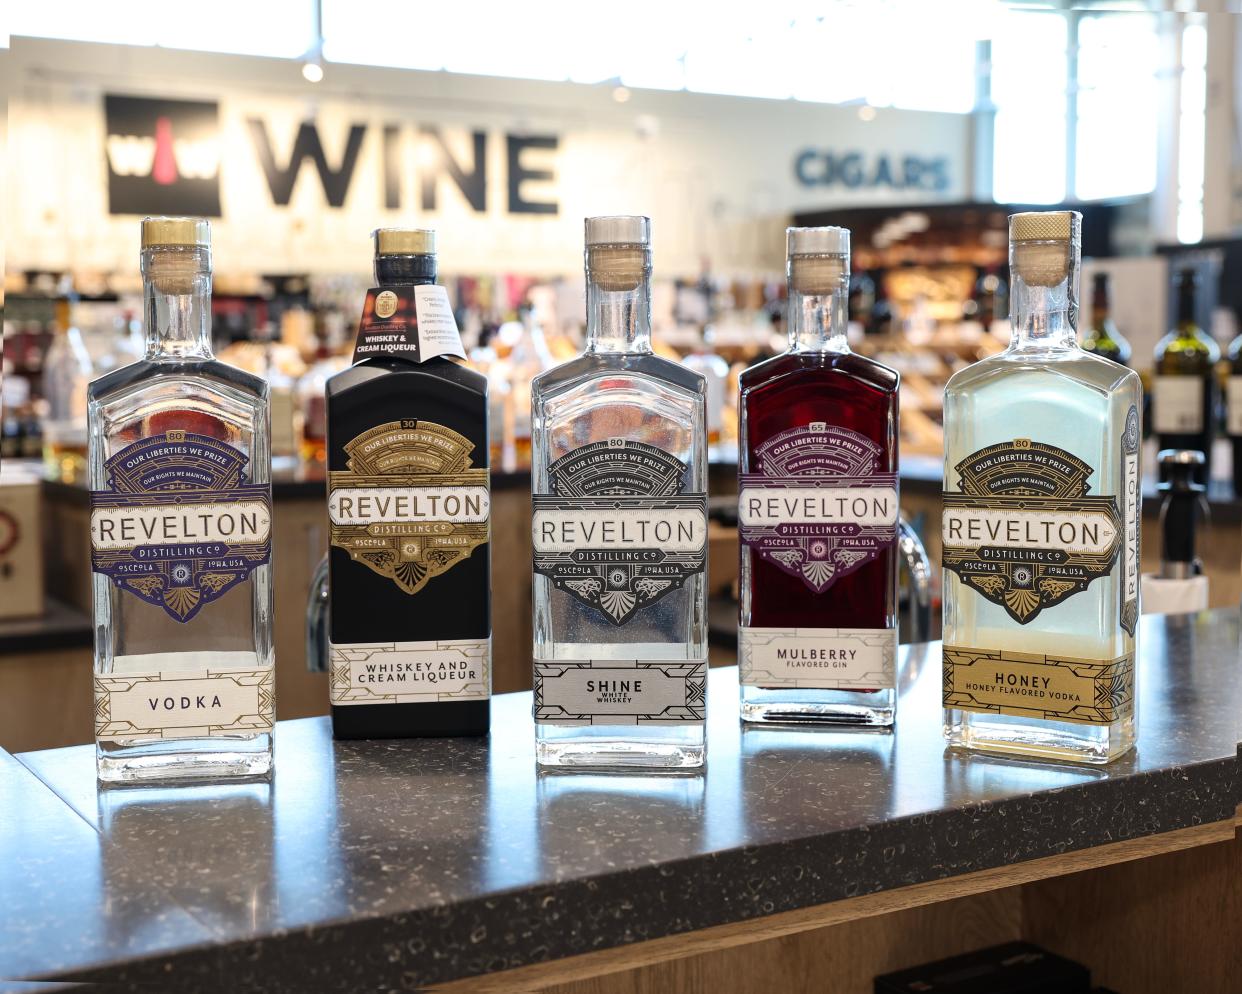 Revelton Distillery in Osceola, Iowa, offers boutique whiskeys and vodkas, including a mulberry-flavored gin. Wall to Wall Wine & Spirits in West Des Moines carries a selection of Iowa spirits, including an entire display of Revelton products.